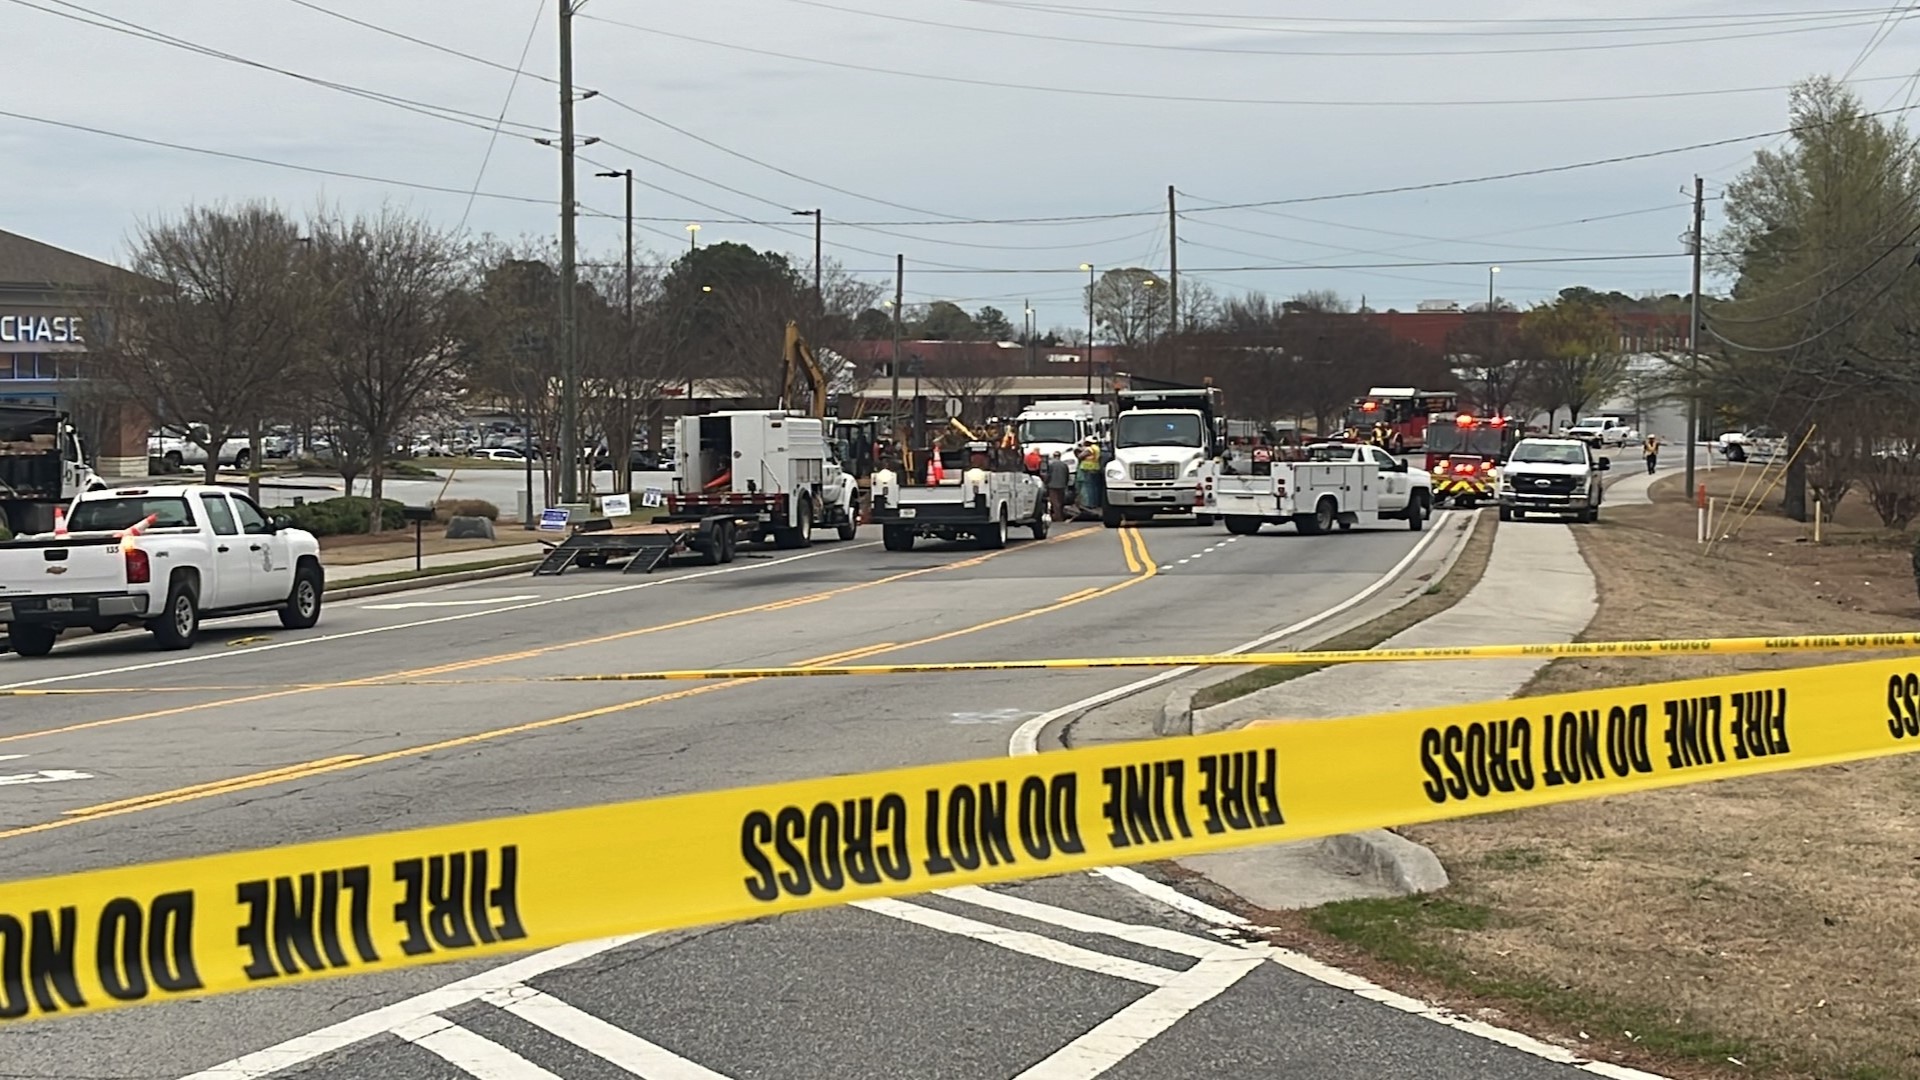 The gas leak happened on Sunday, March 17. The road has since reopened.